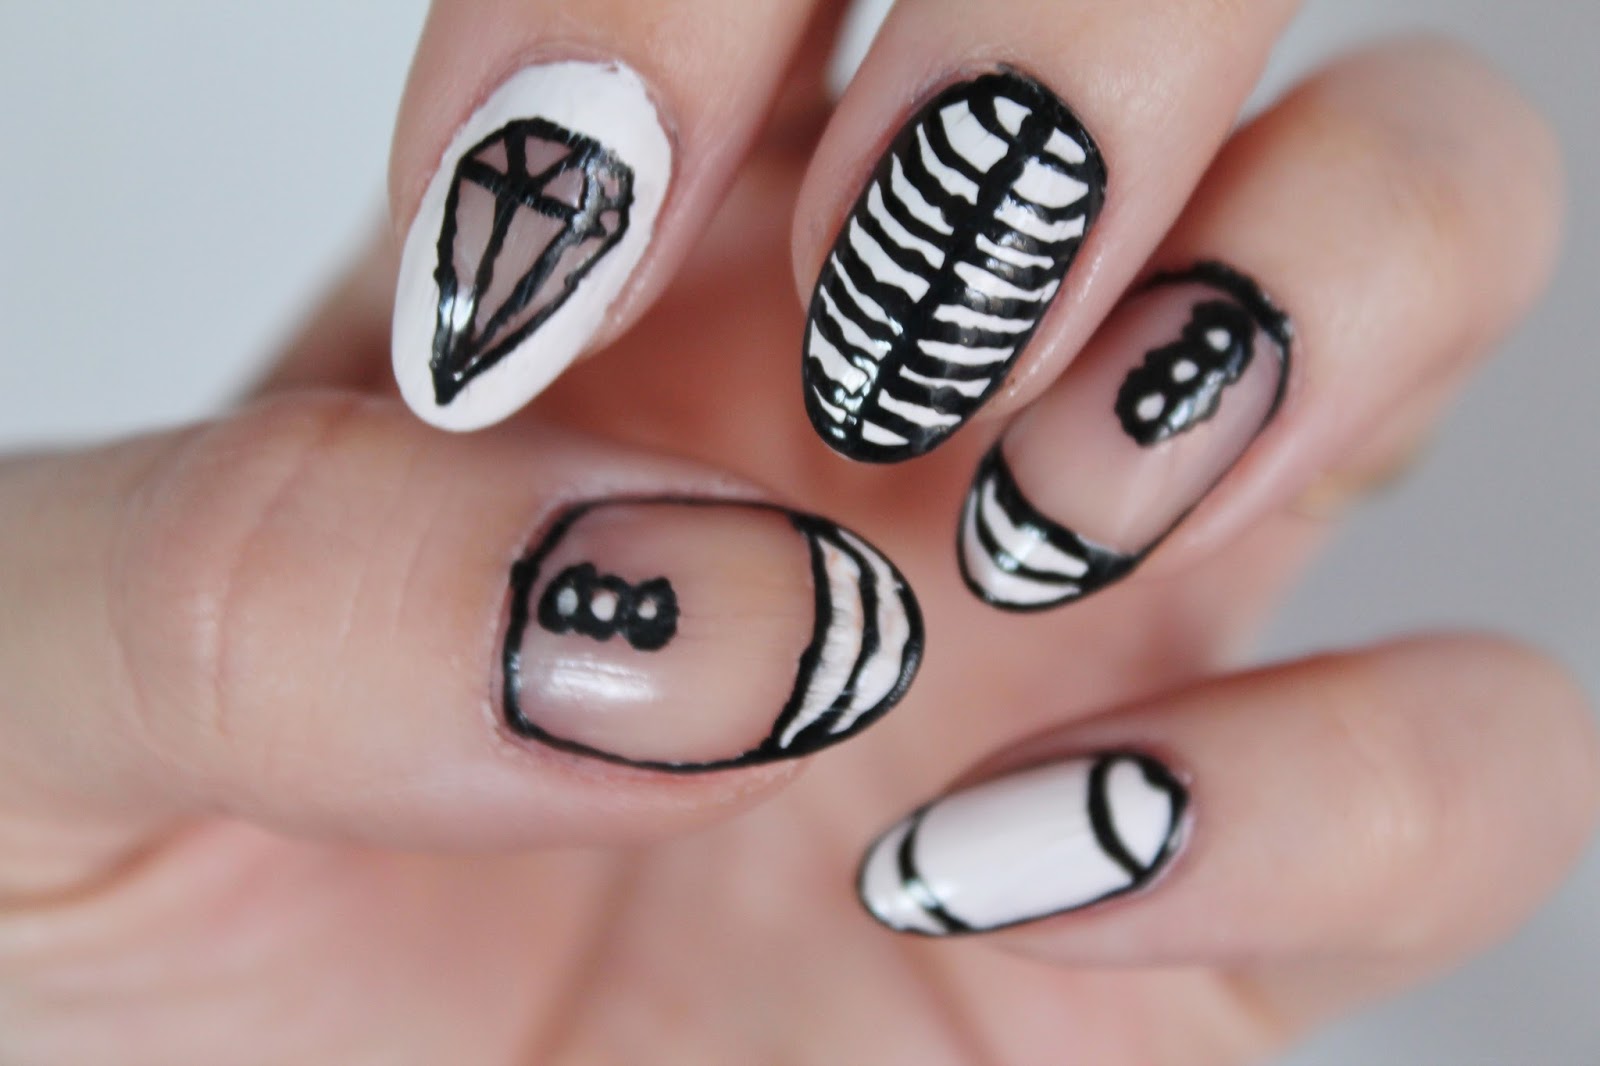 3. Step-by-Step Black and White Nail Art Tutorial for Beginners - wide 8